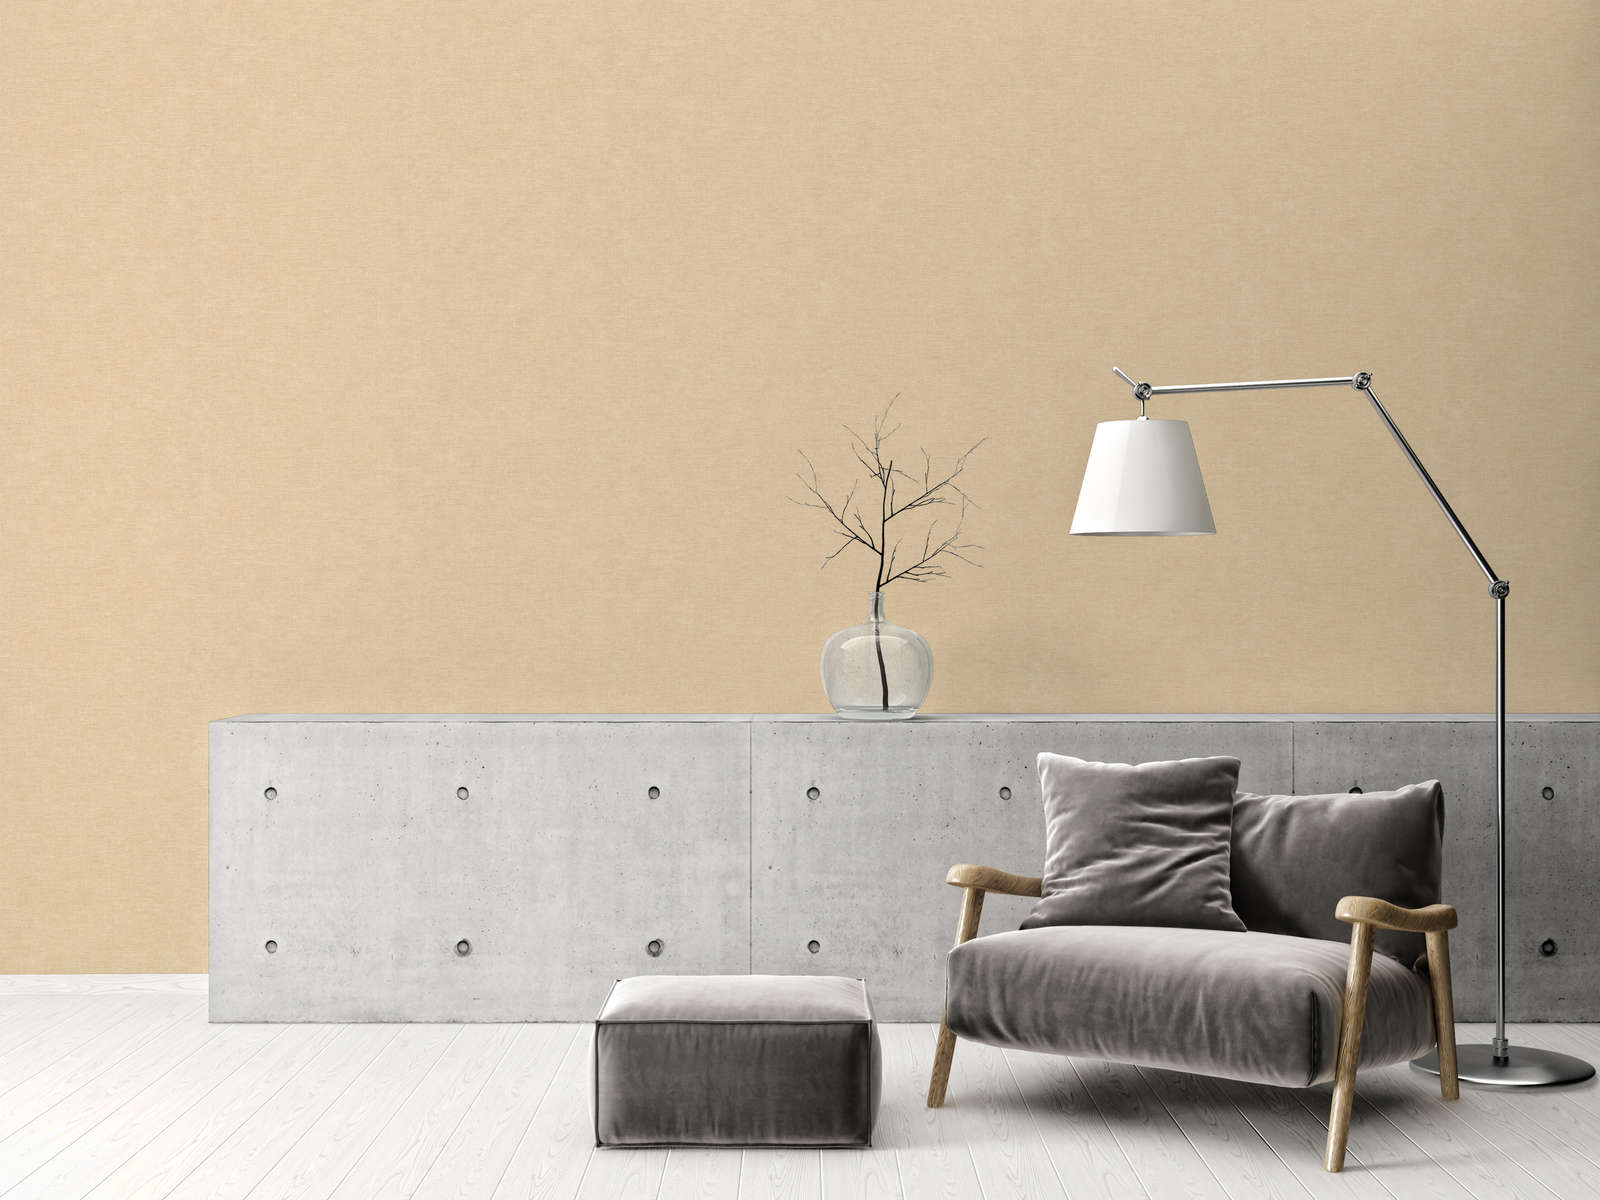             Single-coloured non-woven wallpaper in textile look - beige, brown
        